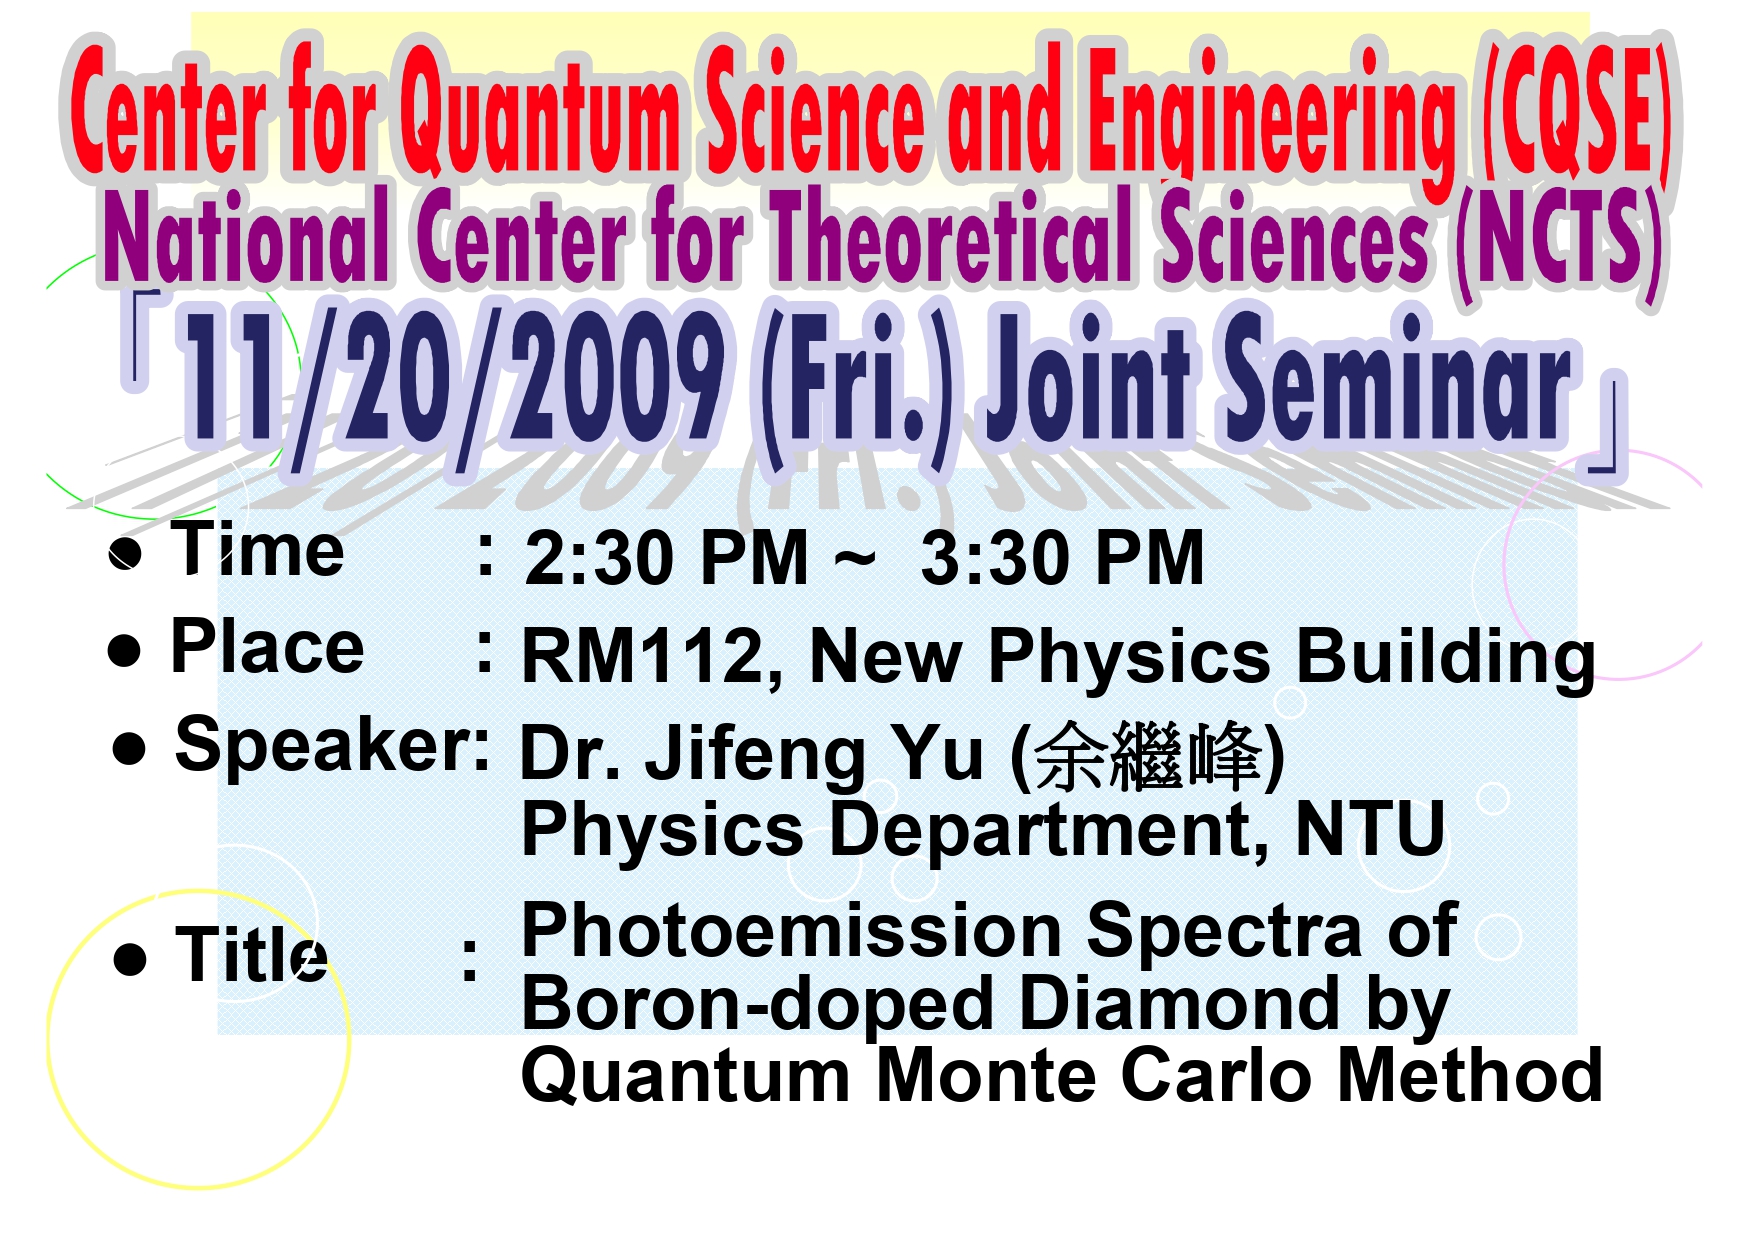 Joint Seminar of Center for Quantum Science and Engineering (CQSE) and National Center for Theoretical Sciences